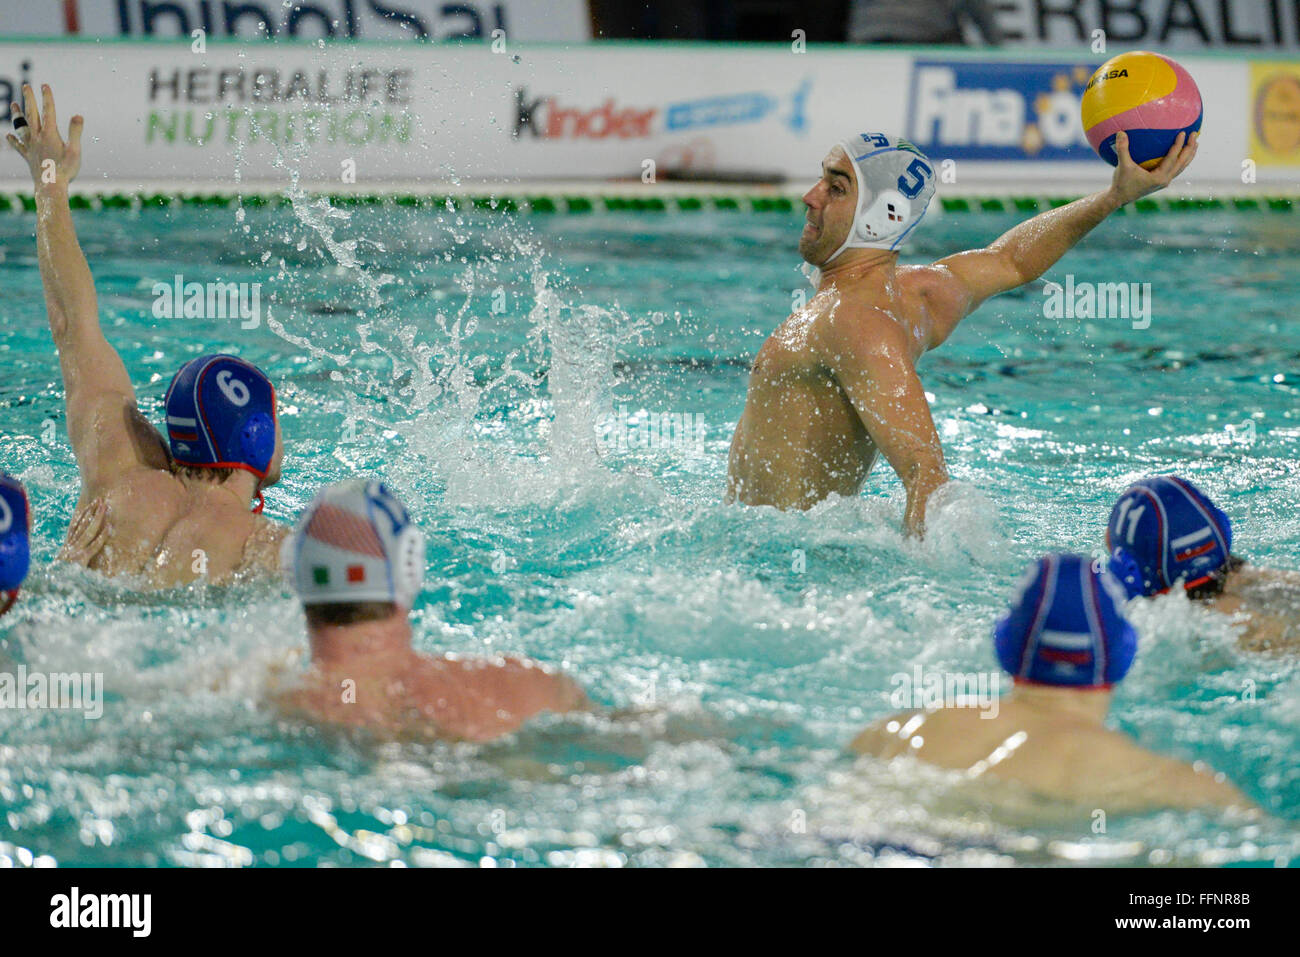 Turin, Italy. 16th February, 2016. Alex Giorgetti of Italy shoot the ball for goal against  Russia during the match between Russia and Italy  at the Waterpolo World Championships in Turin  Palazzo del Nuoto on Febraury 16, 2016 in Turin, Italy. Credit:  Stefano Guidi/Alamy Live News Stock Photo